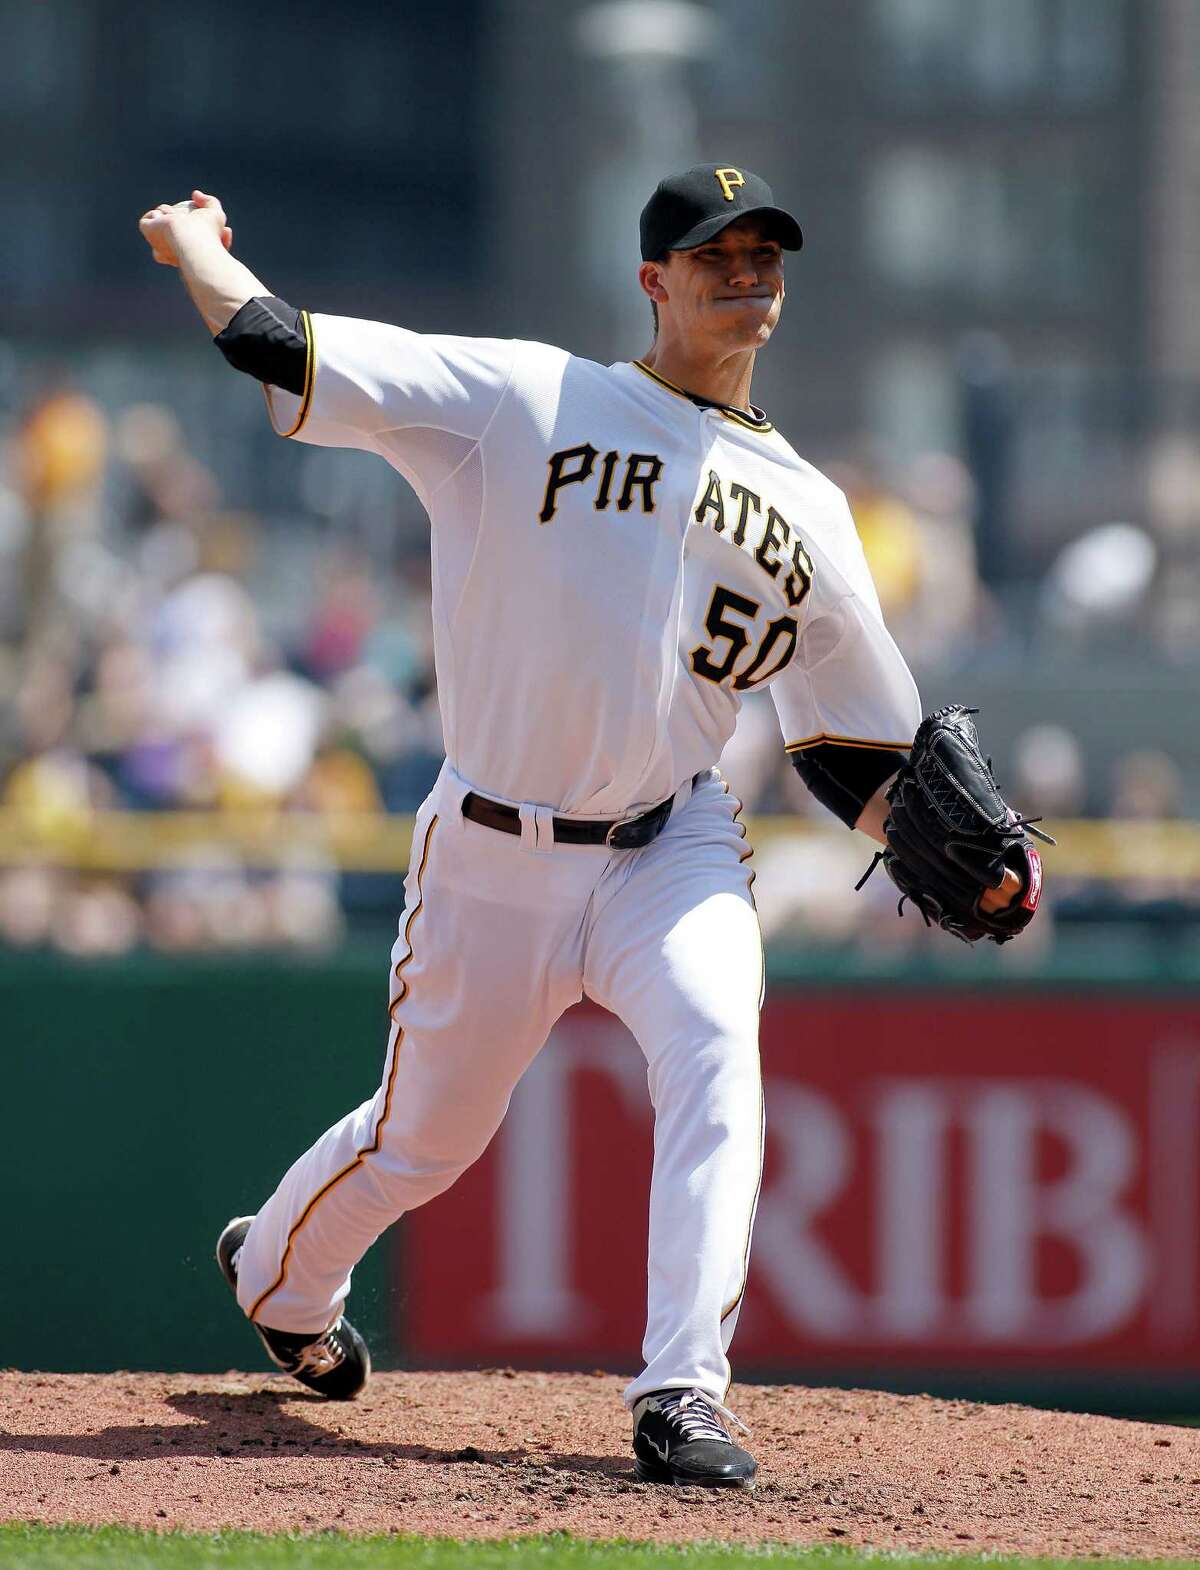 PITTSBURGH, PA - MAY 6: Charlie Morton #50 of the Pittsburgh Pirates pitches against the Cincinnati Reds during the game on May 6, 2012 at PNC Park in Pittsburgh, Pennsylvania. (Photo by Justin K. Aller/Getty Images)